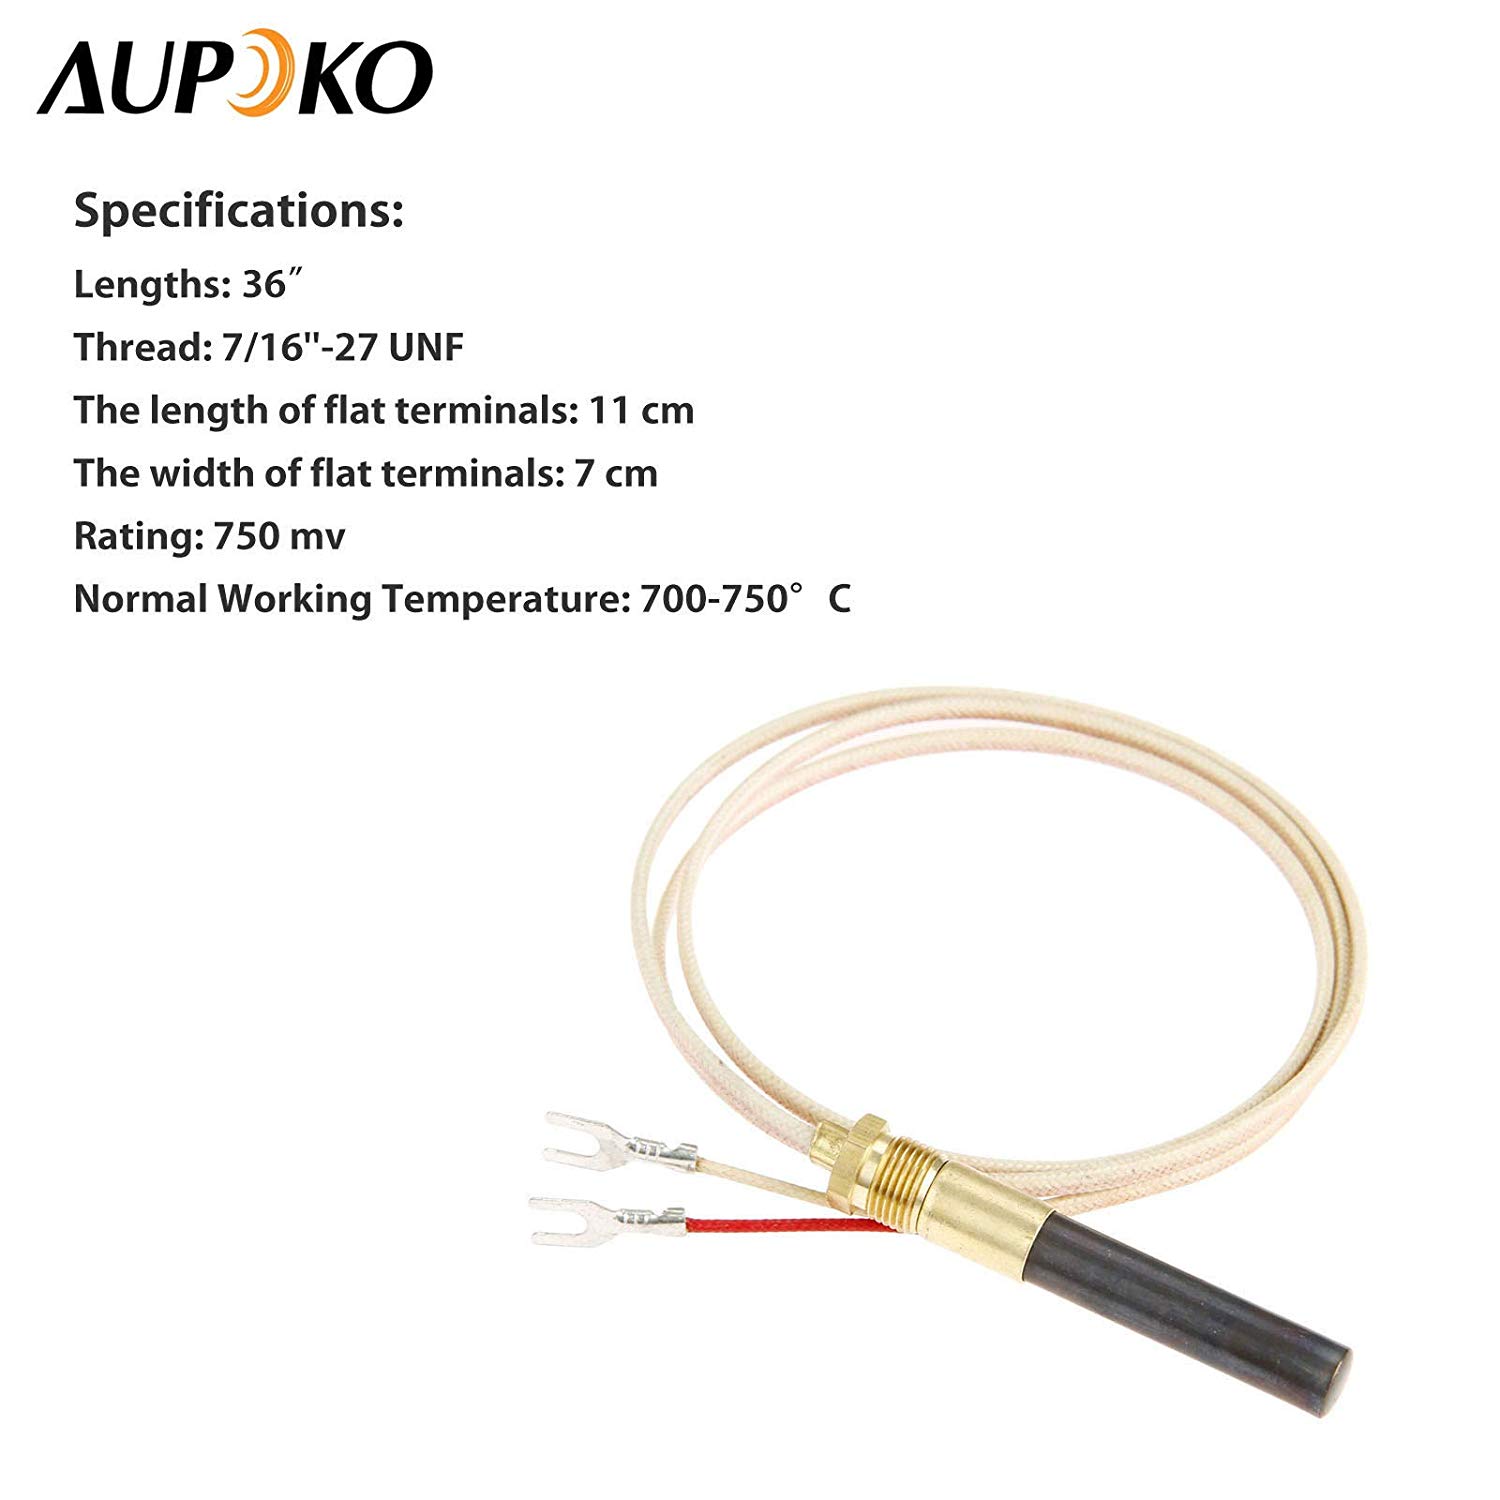 Gas Fireplace thermopile Replacement Lovely Amazon Aupoko Fireplace Millivolt thermopile Generators